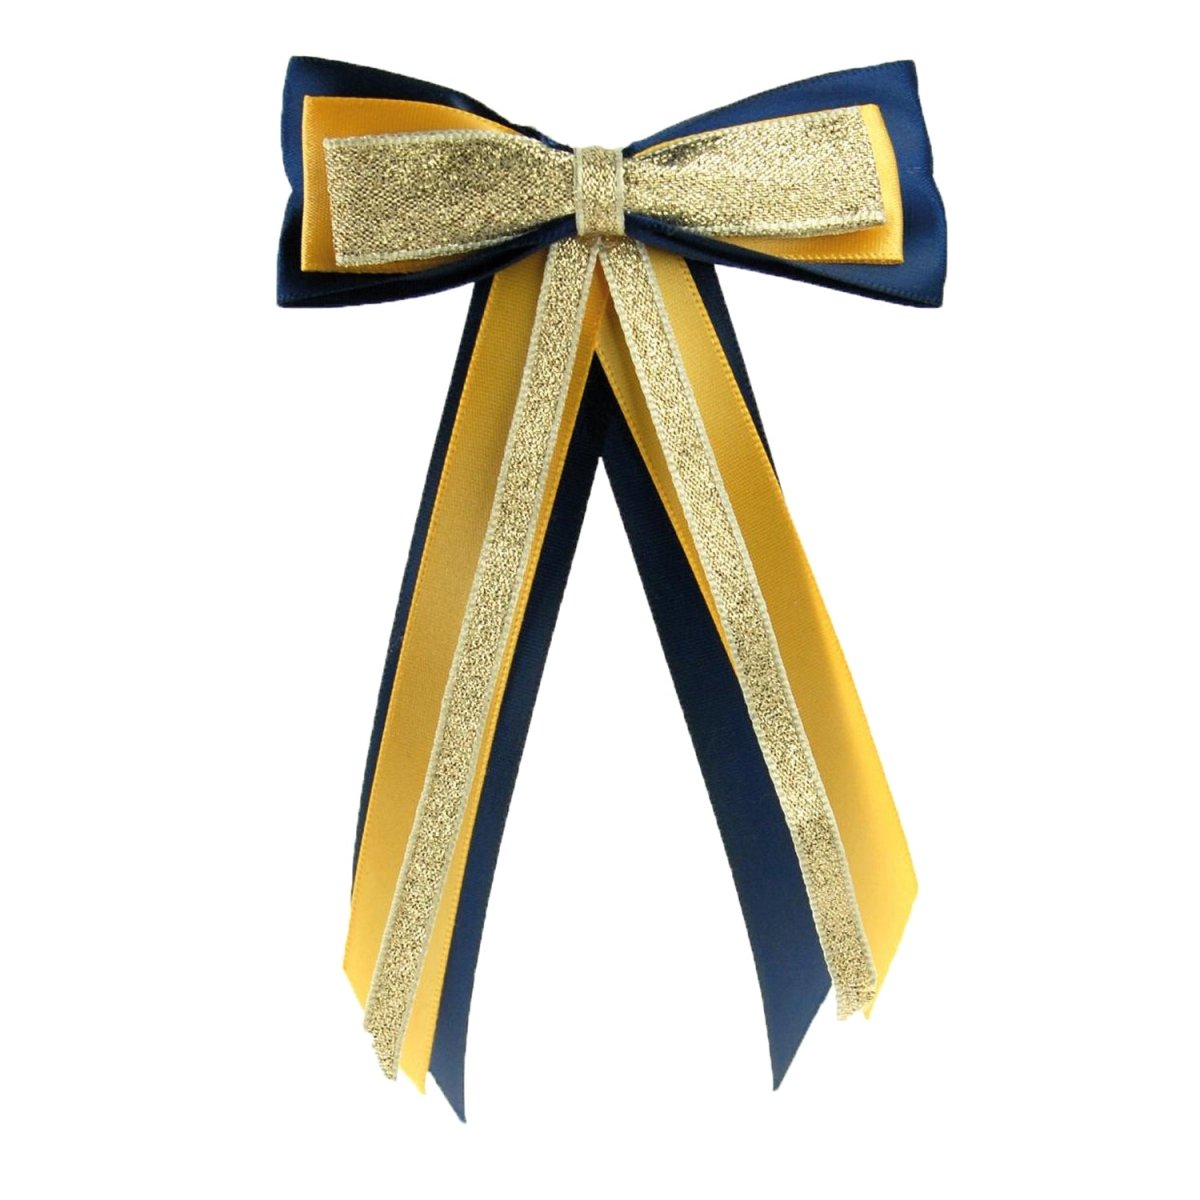 Showquest Hairbow & Tails - Navy/Sunshine Yellow/Gold -